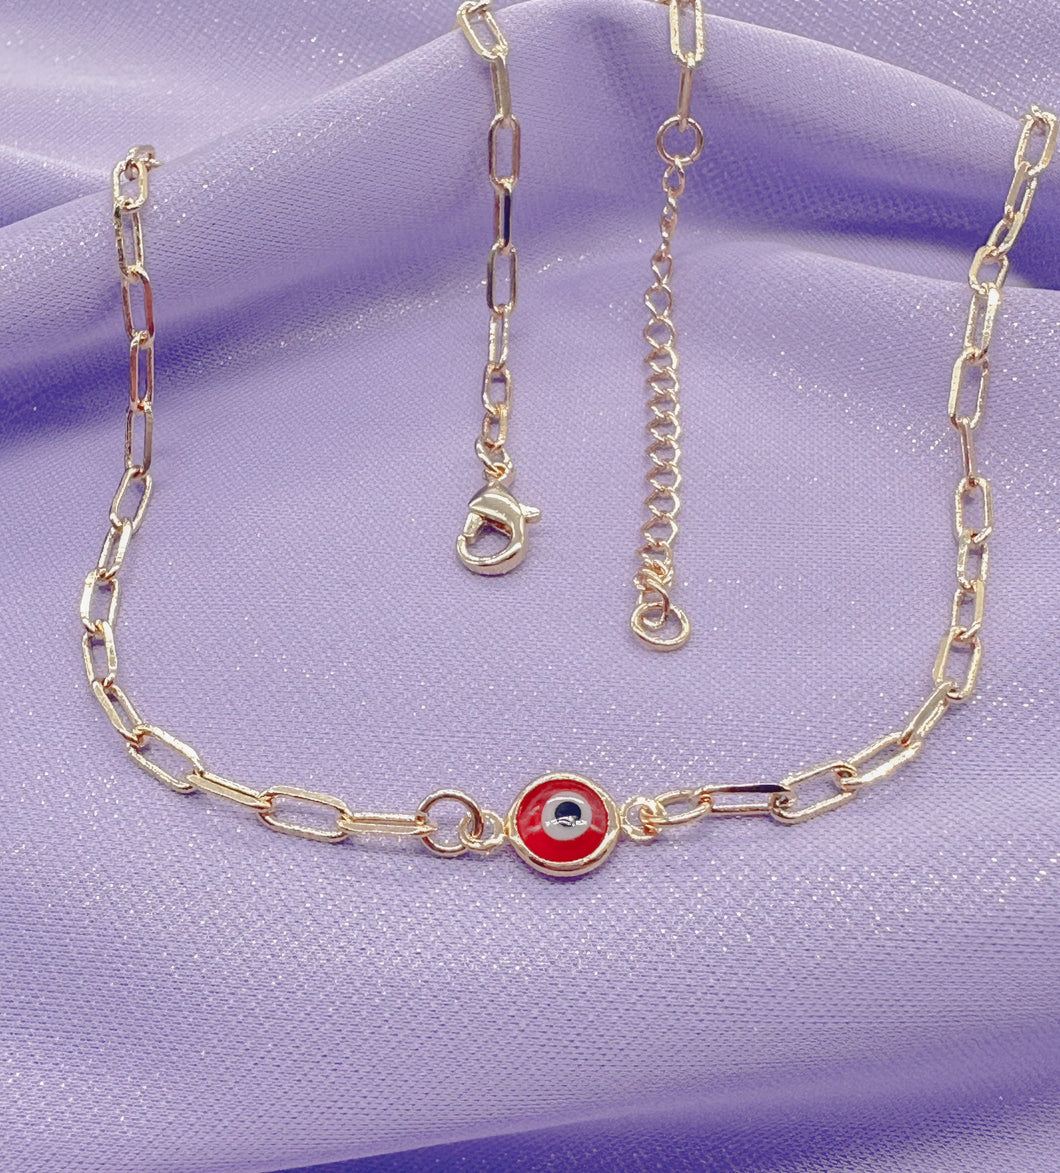 18k Gold Filled Paperclip Necklace Chain with Red eye In The Center